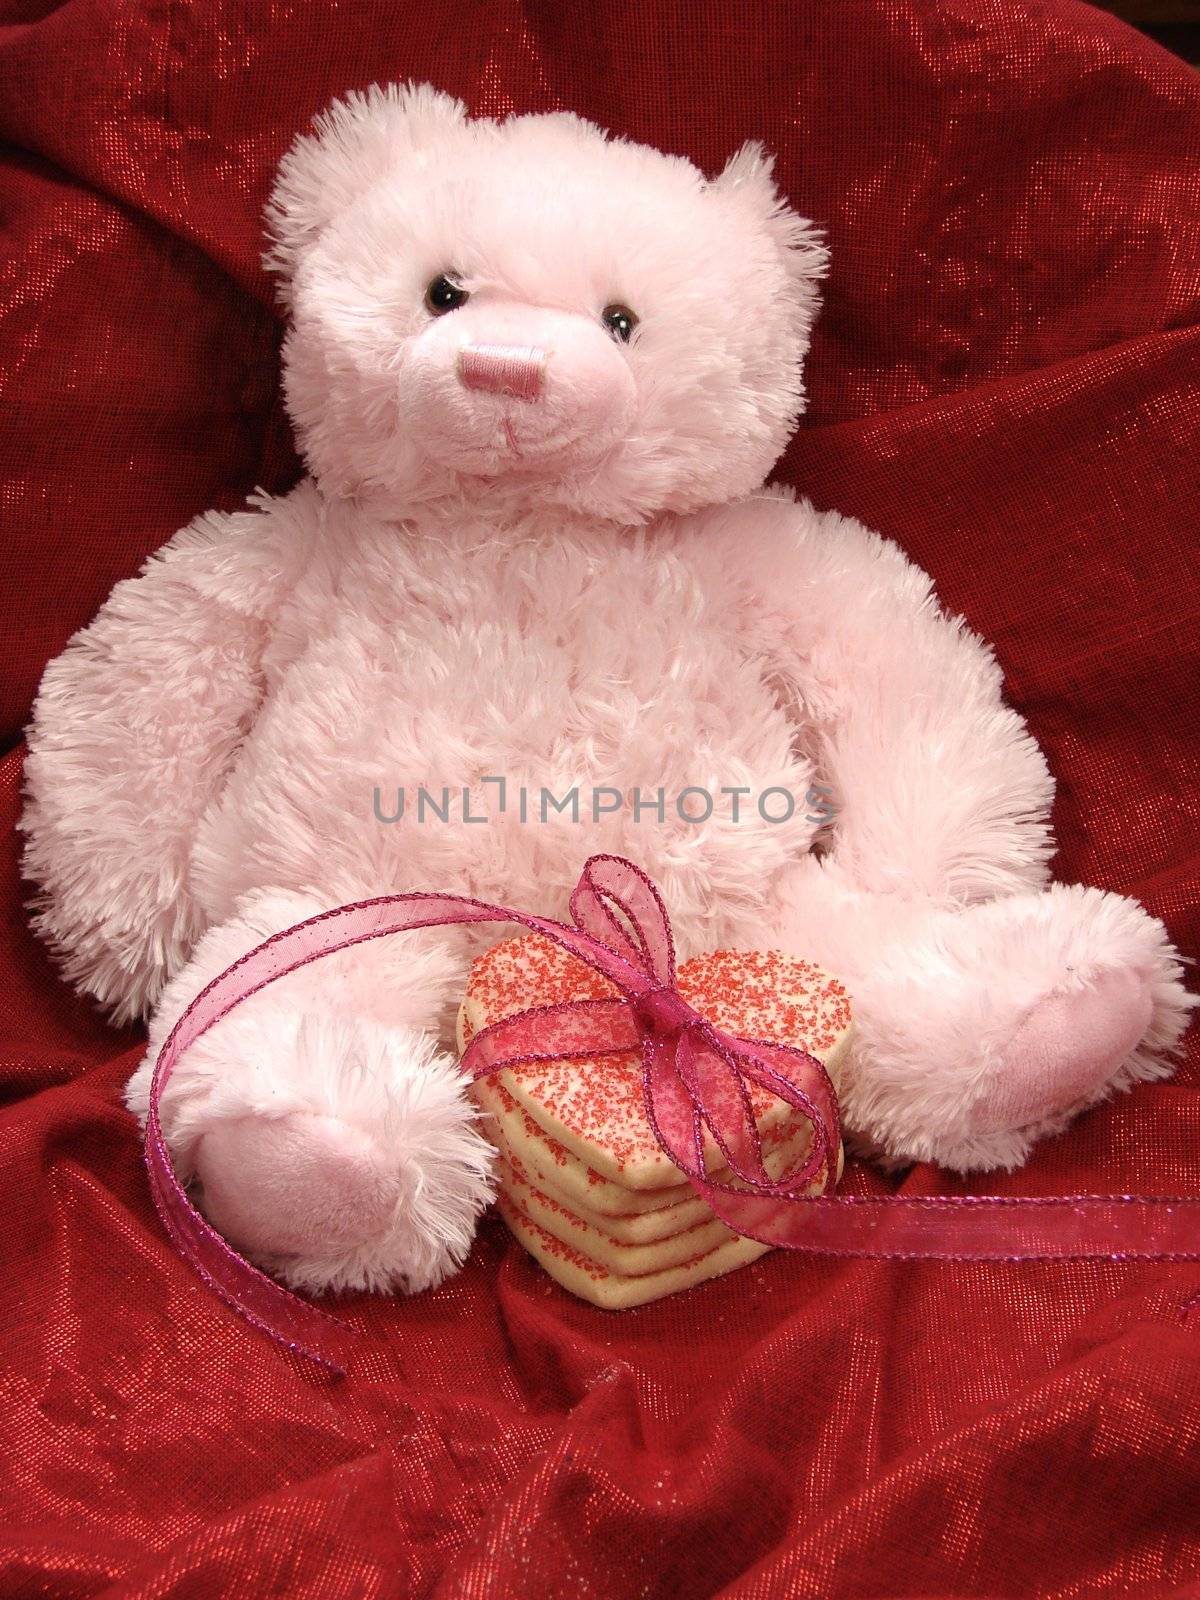 Pink Valentine bear with heart shaped cookies stacked and tied with ribbon. Red fabric background.